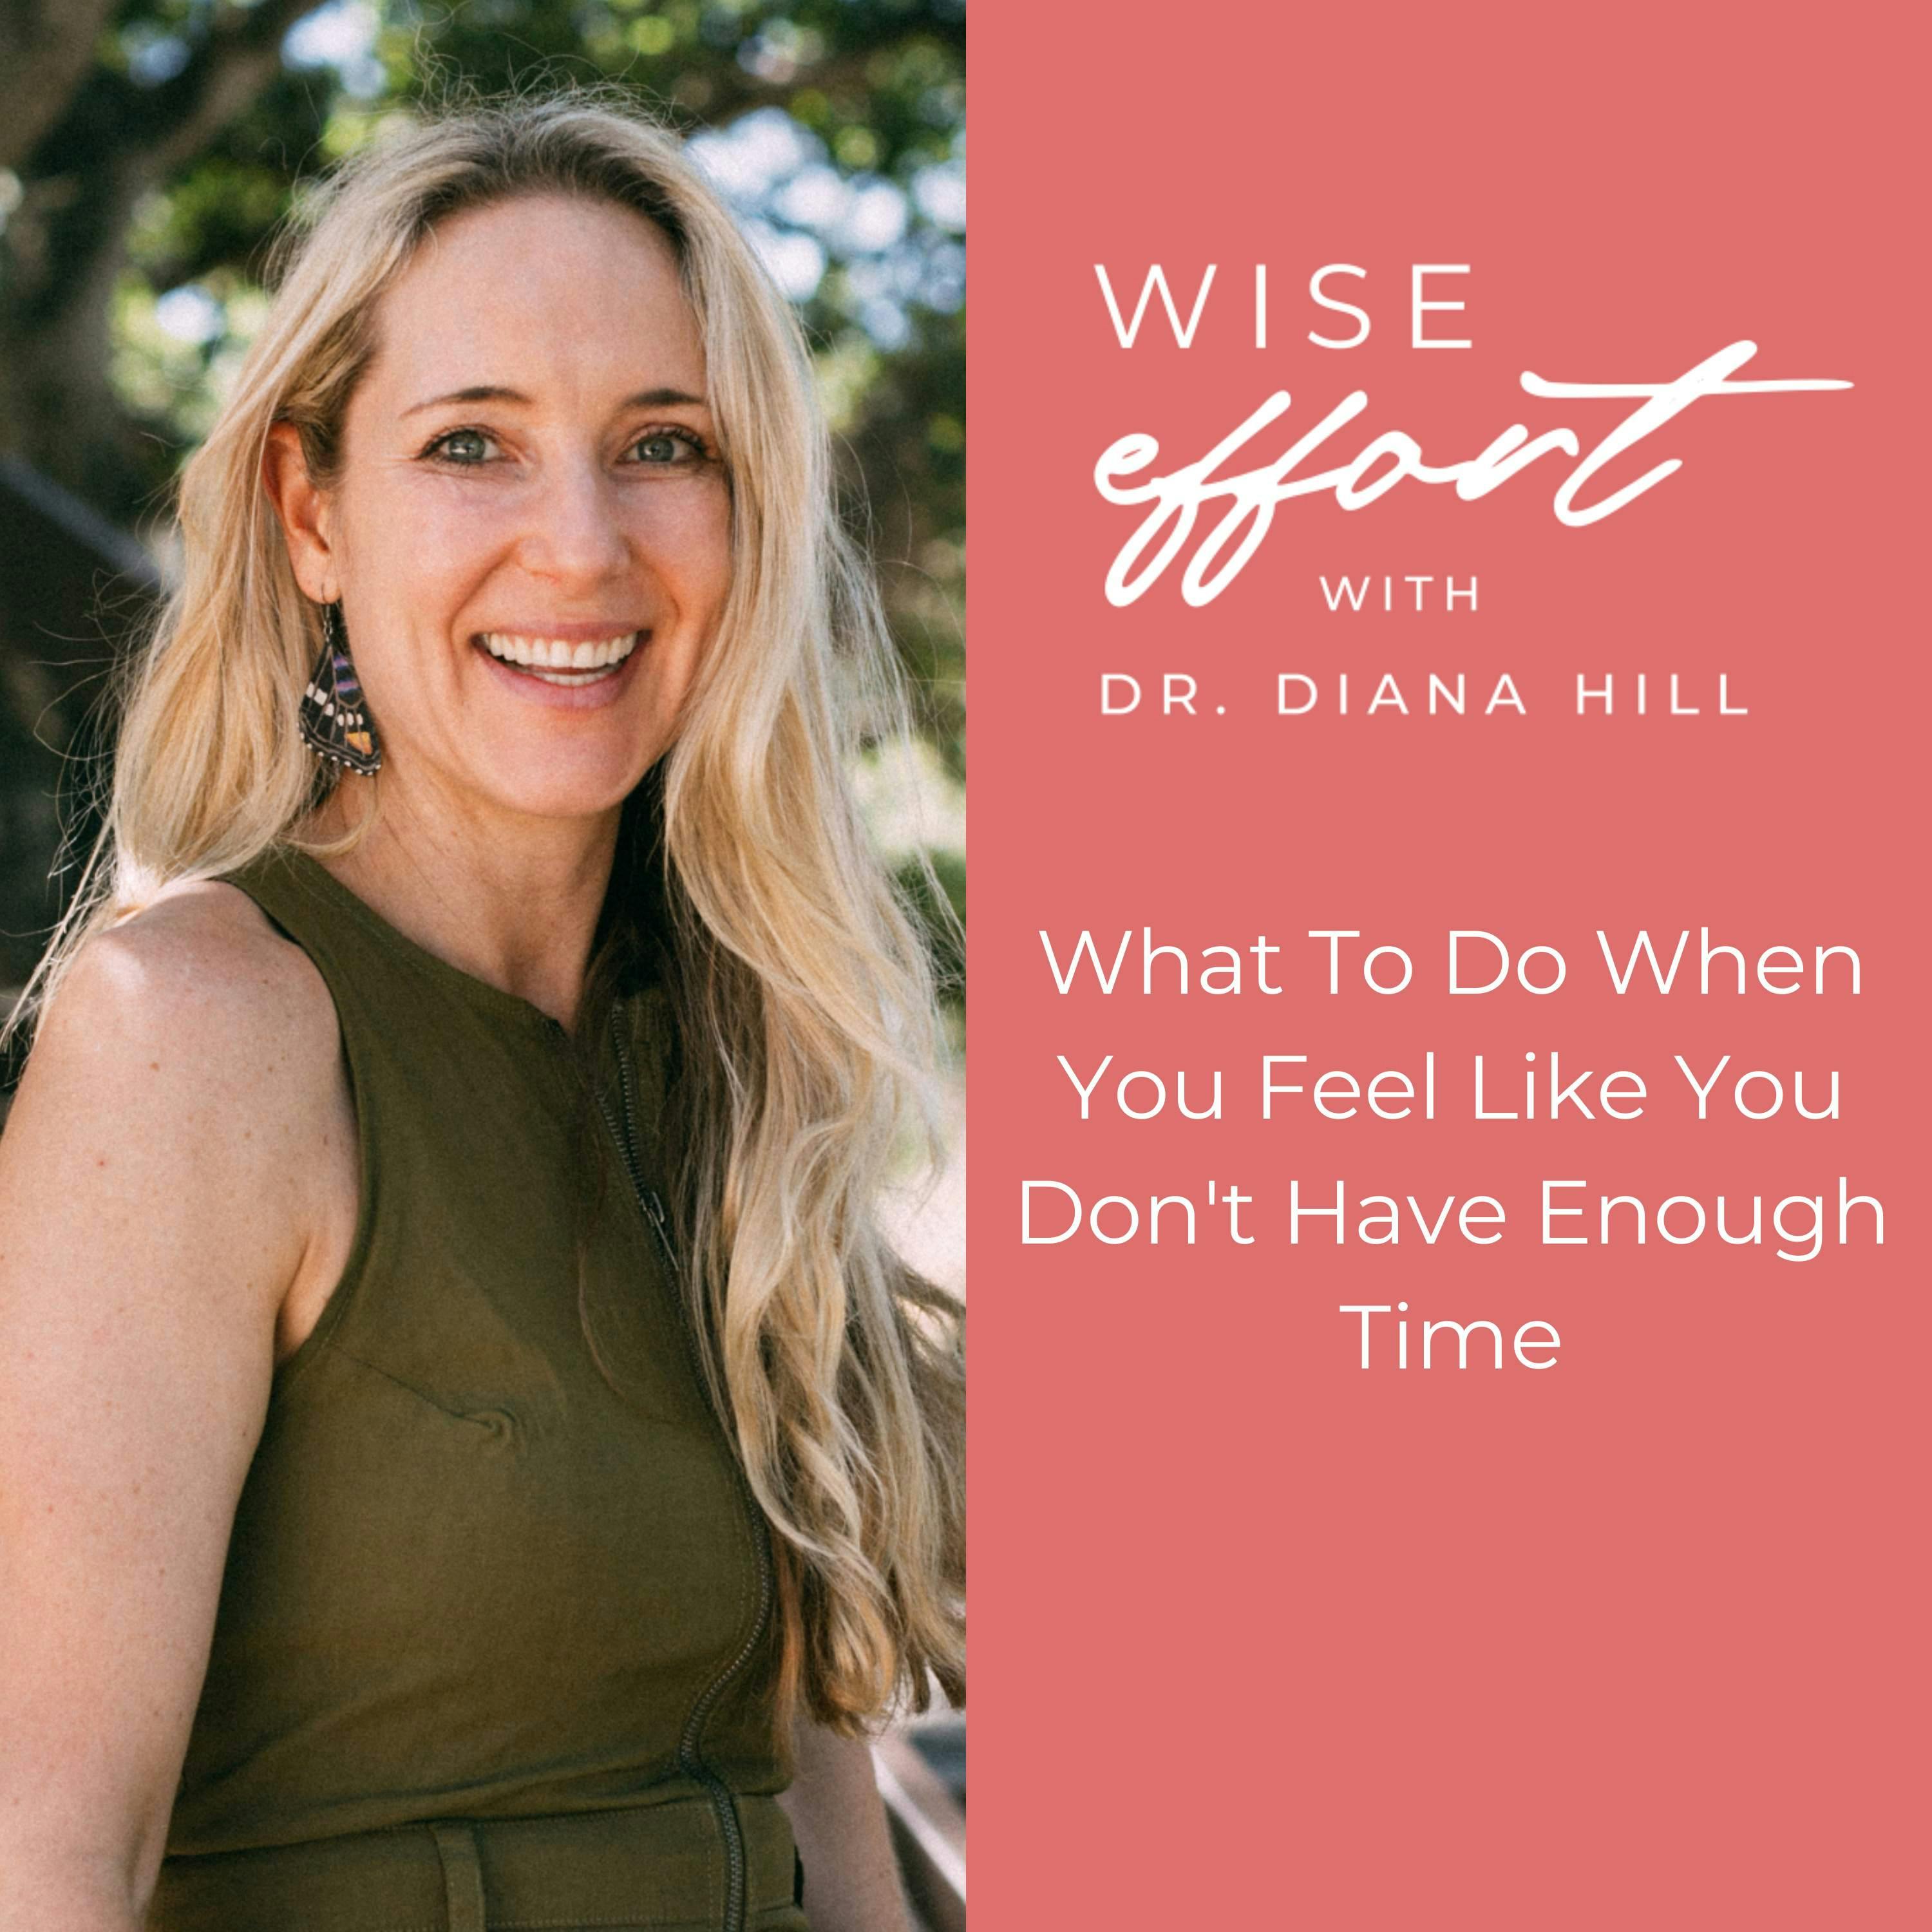 What to do when you feel like you don't have enough time wise effort with dr Diana hill 